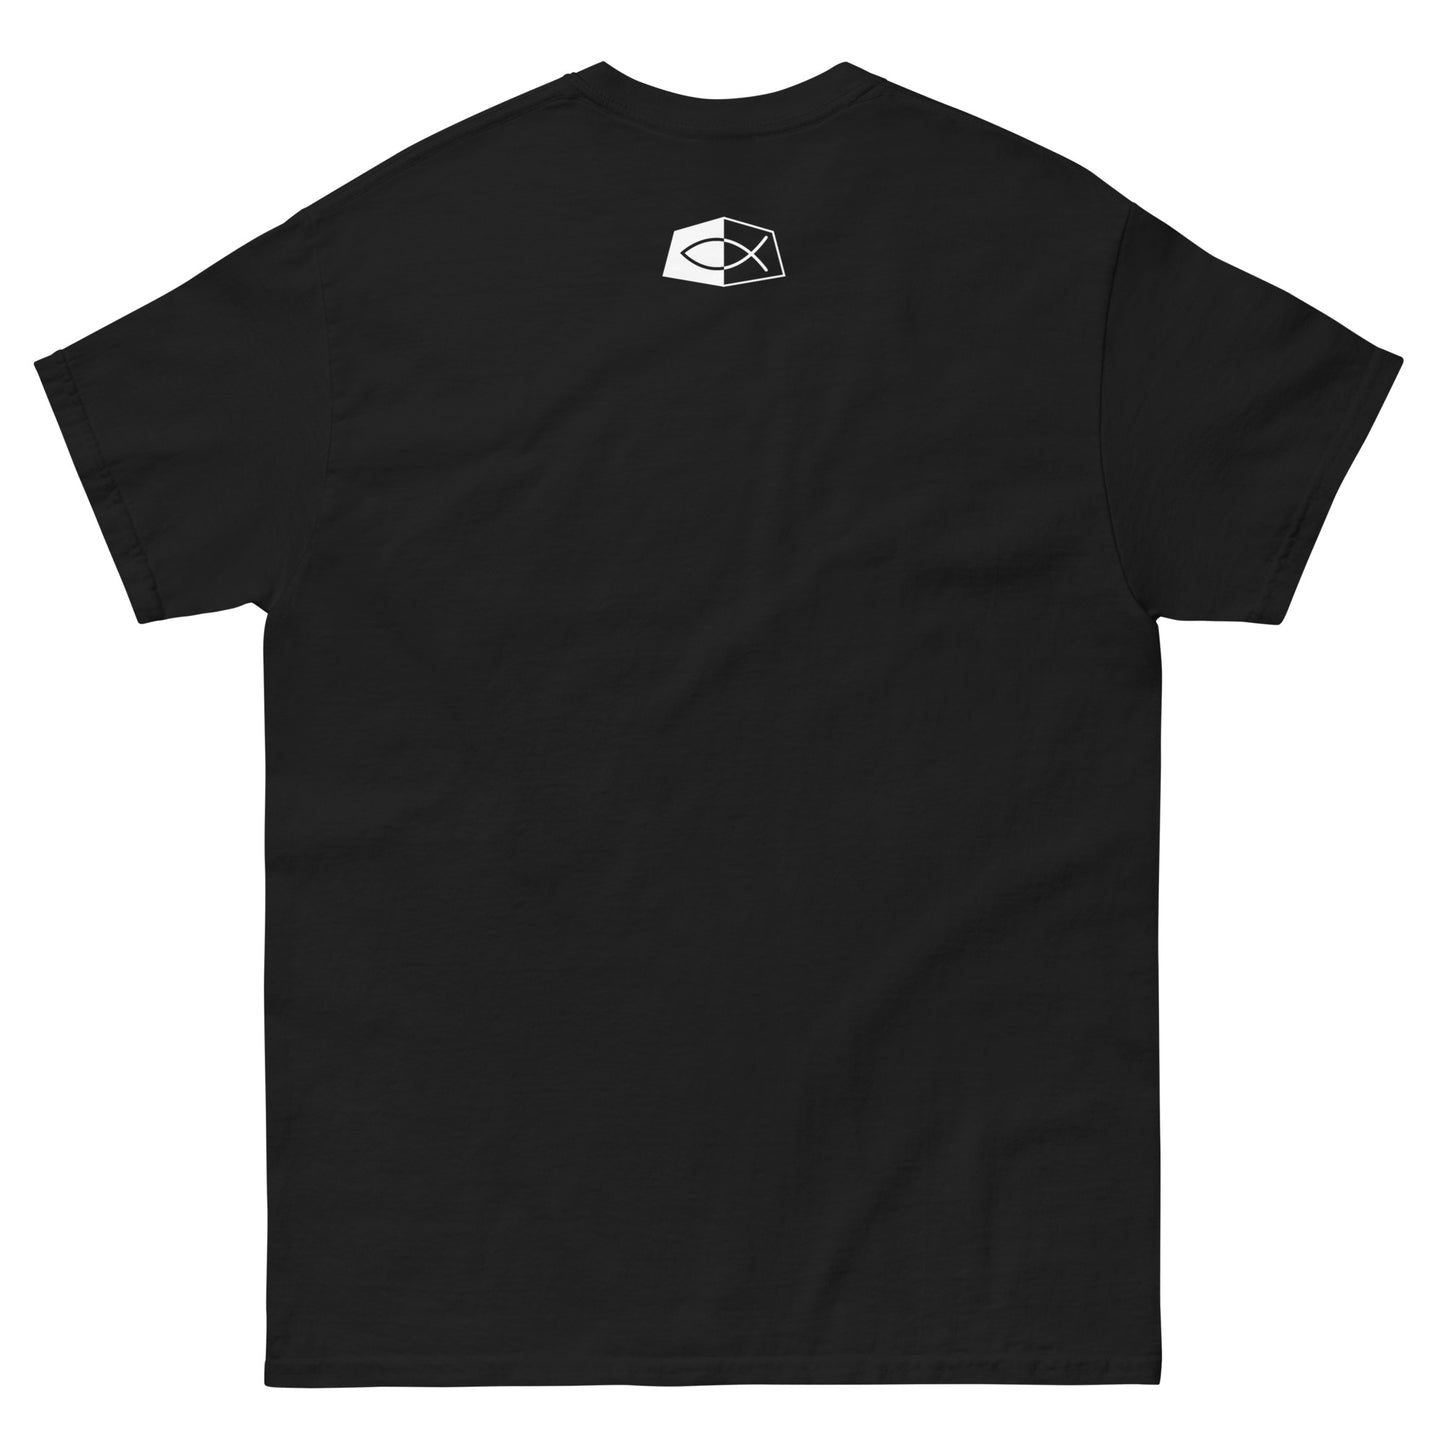 ARMED WITH GRACE - Men's classic tee